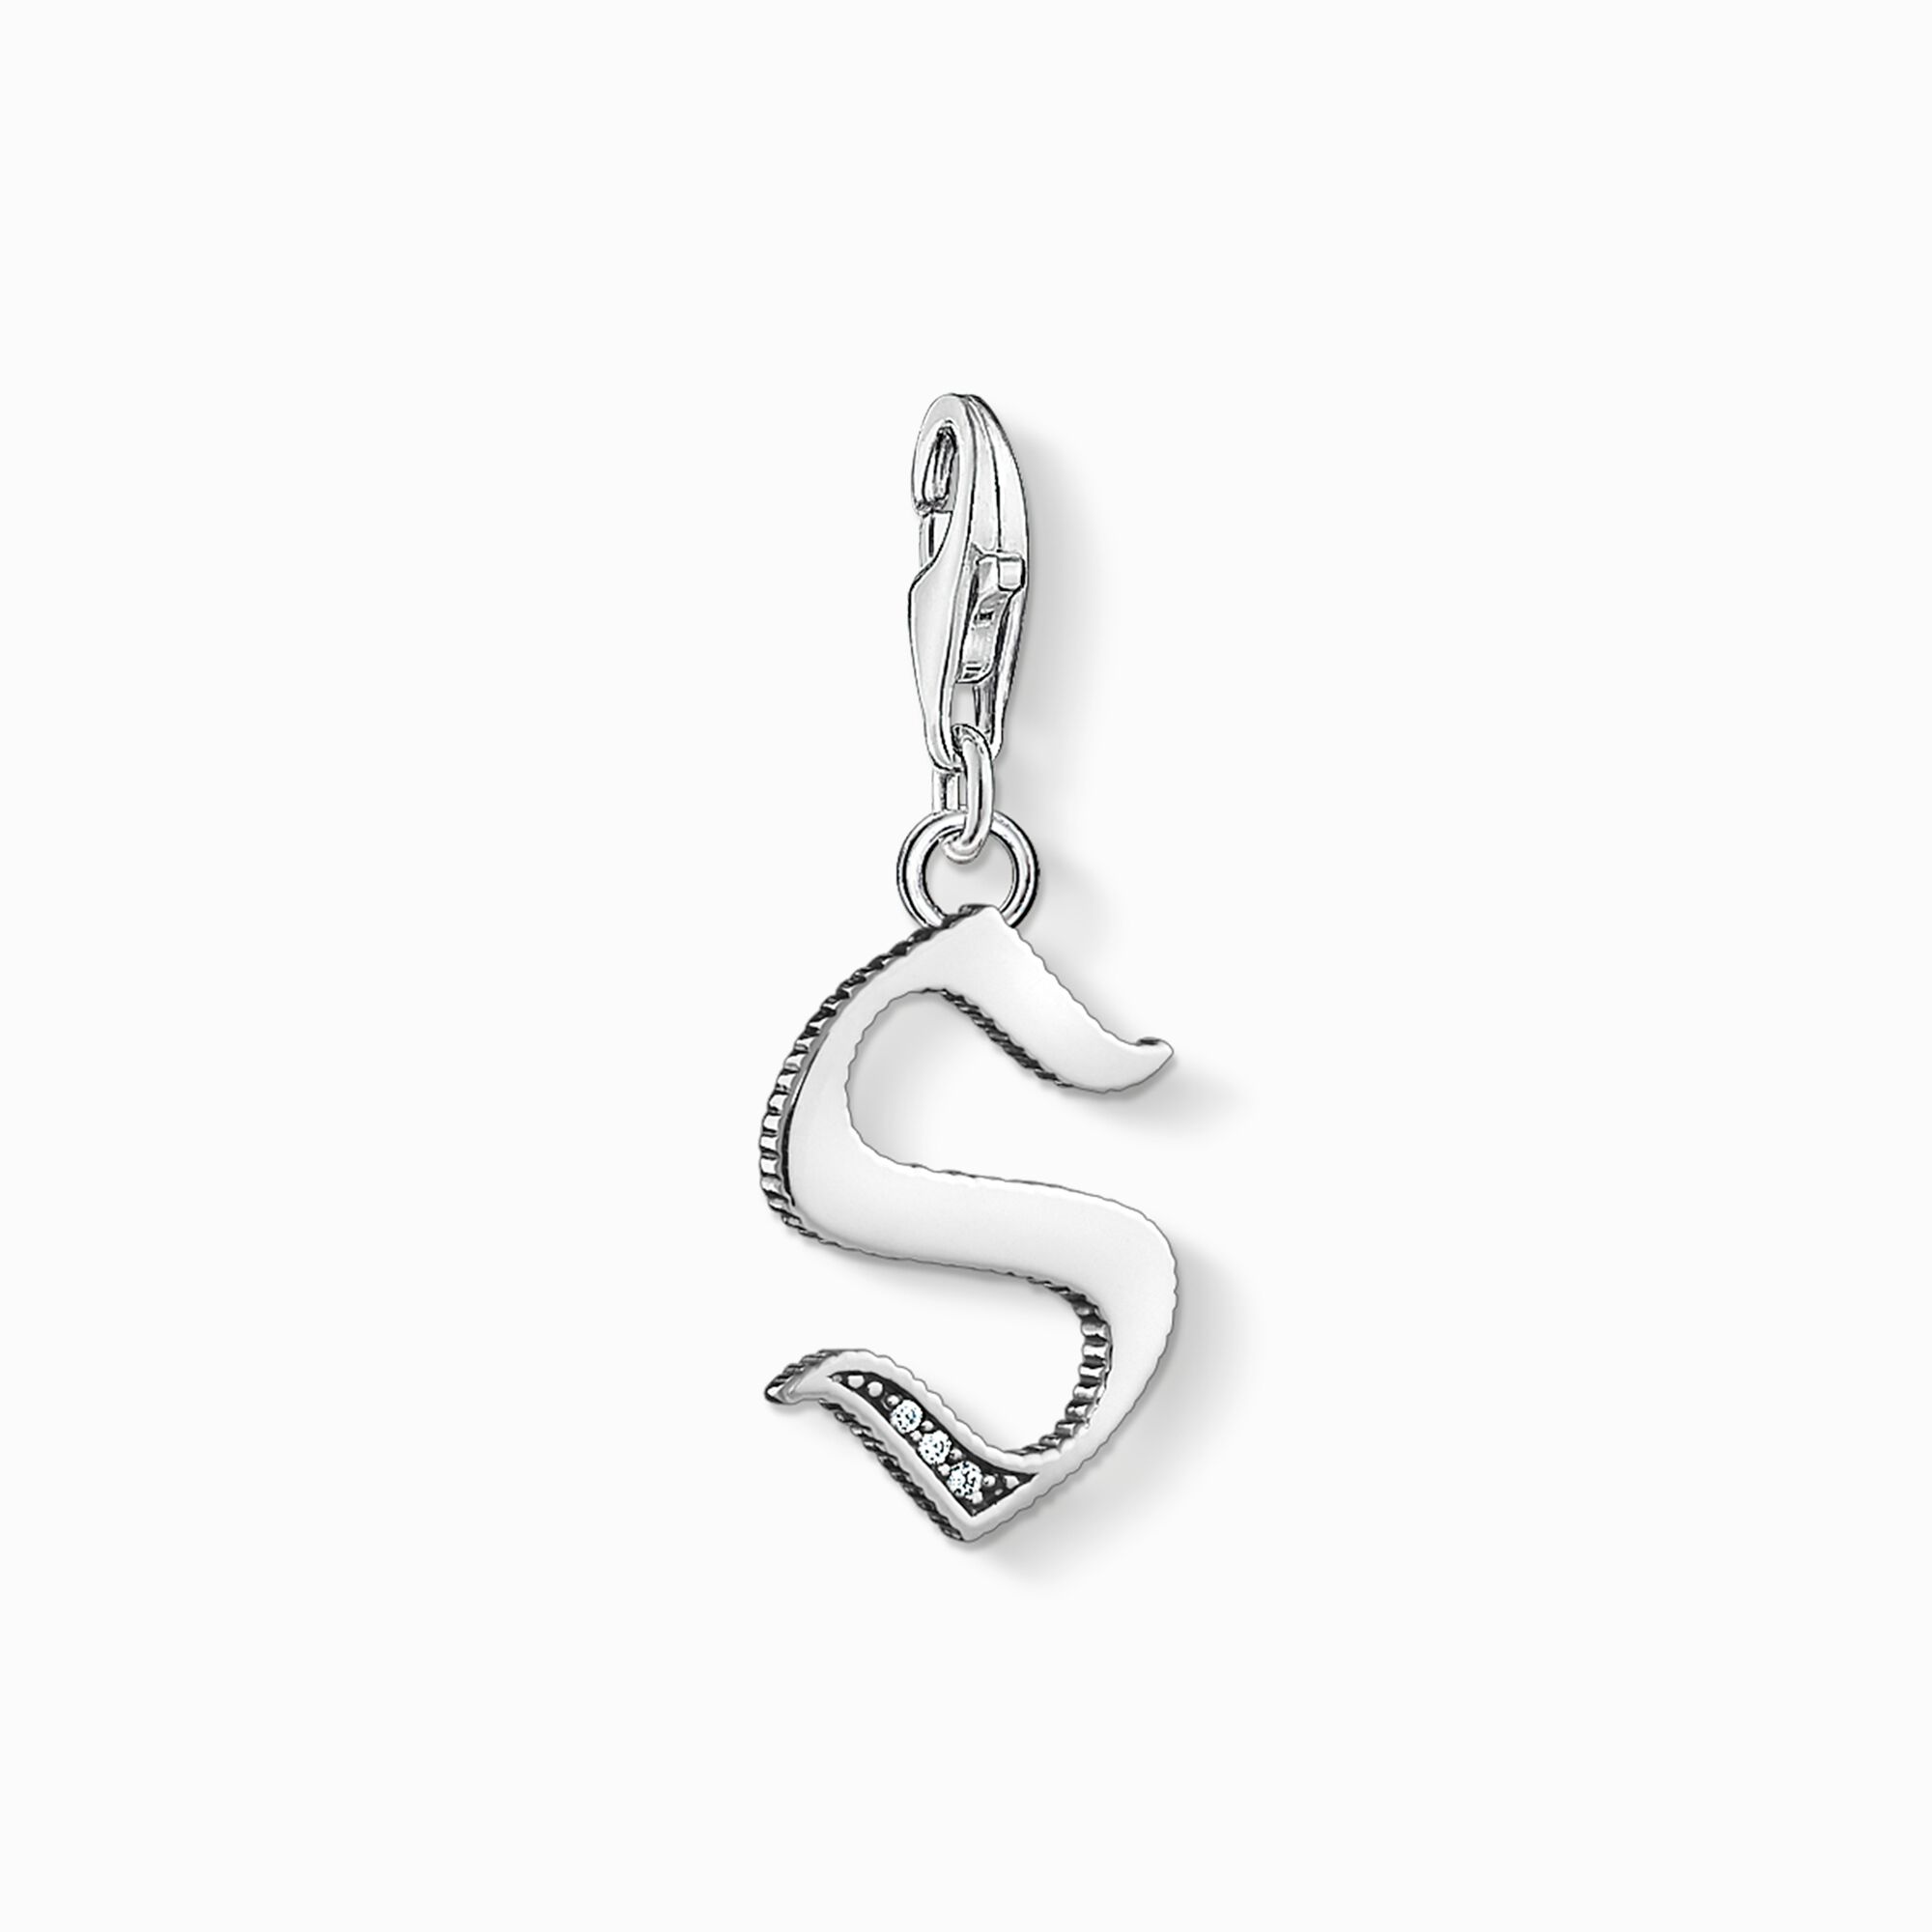 Charm pendant letter S silver from the Charm Club collection in the THOMAS SABO online store